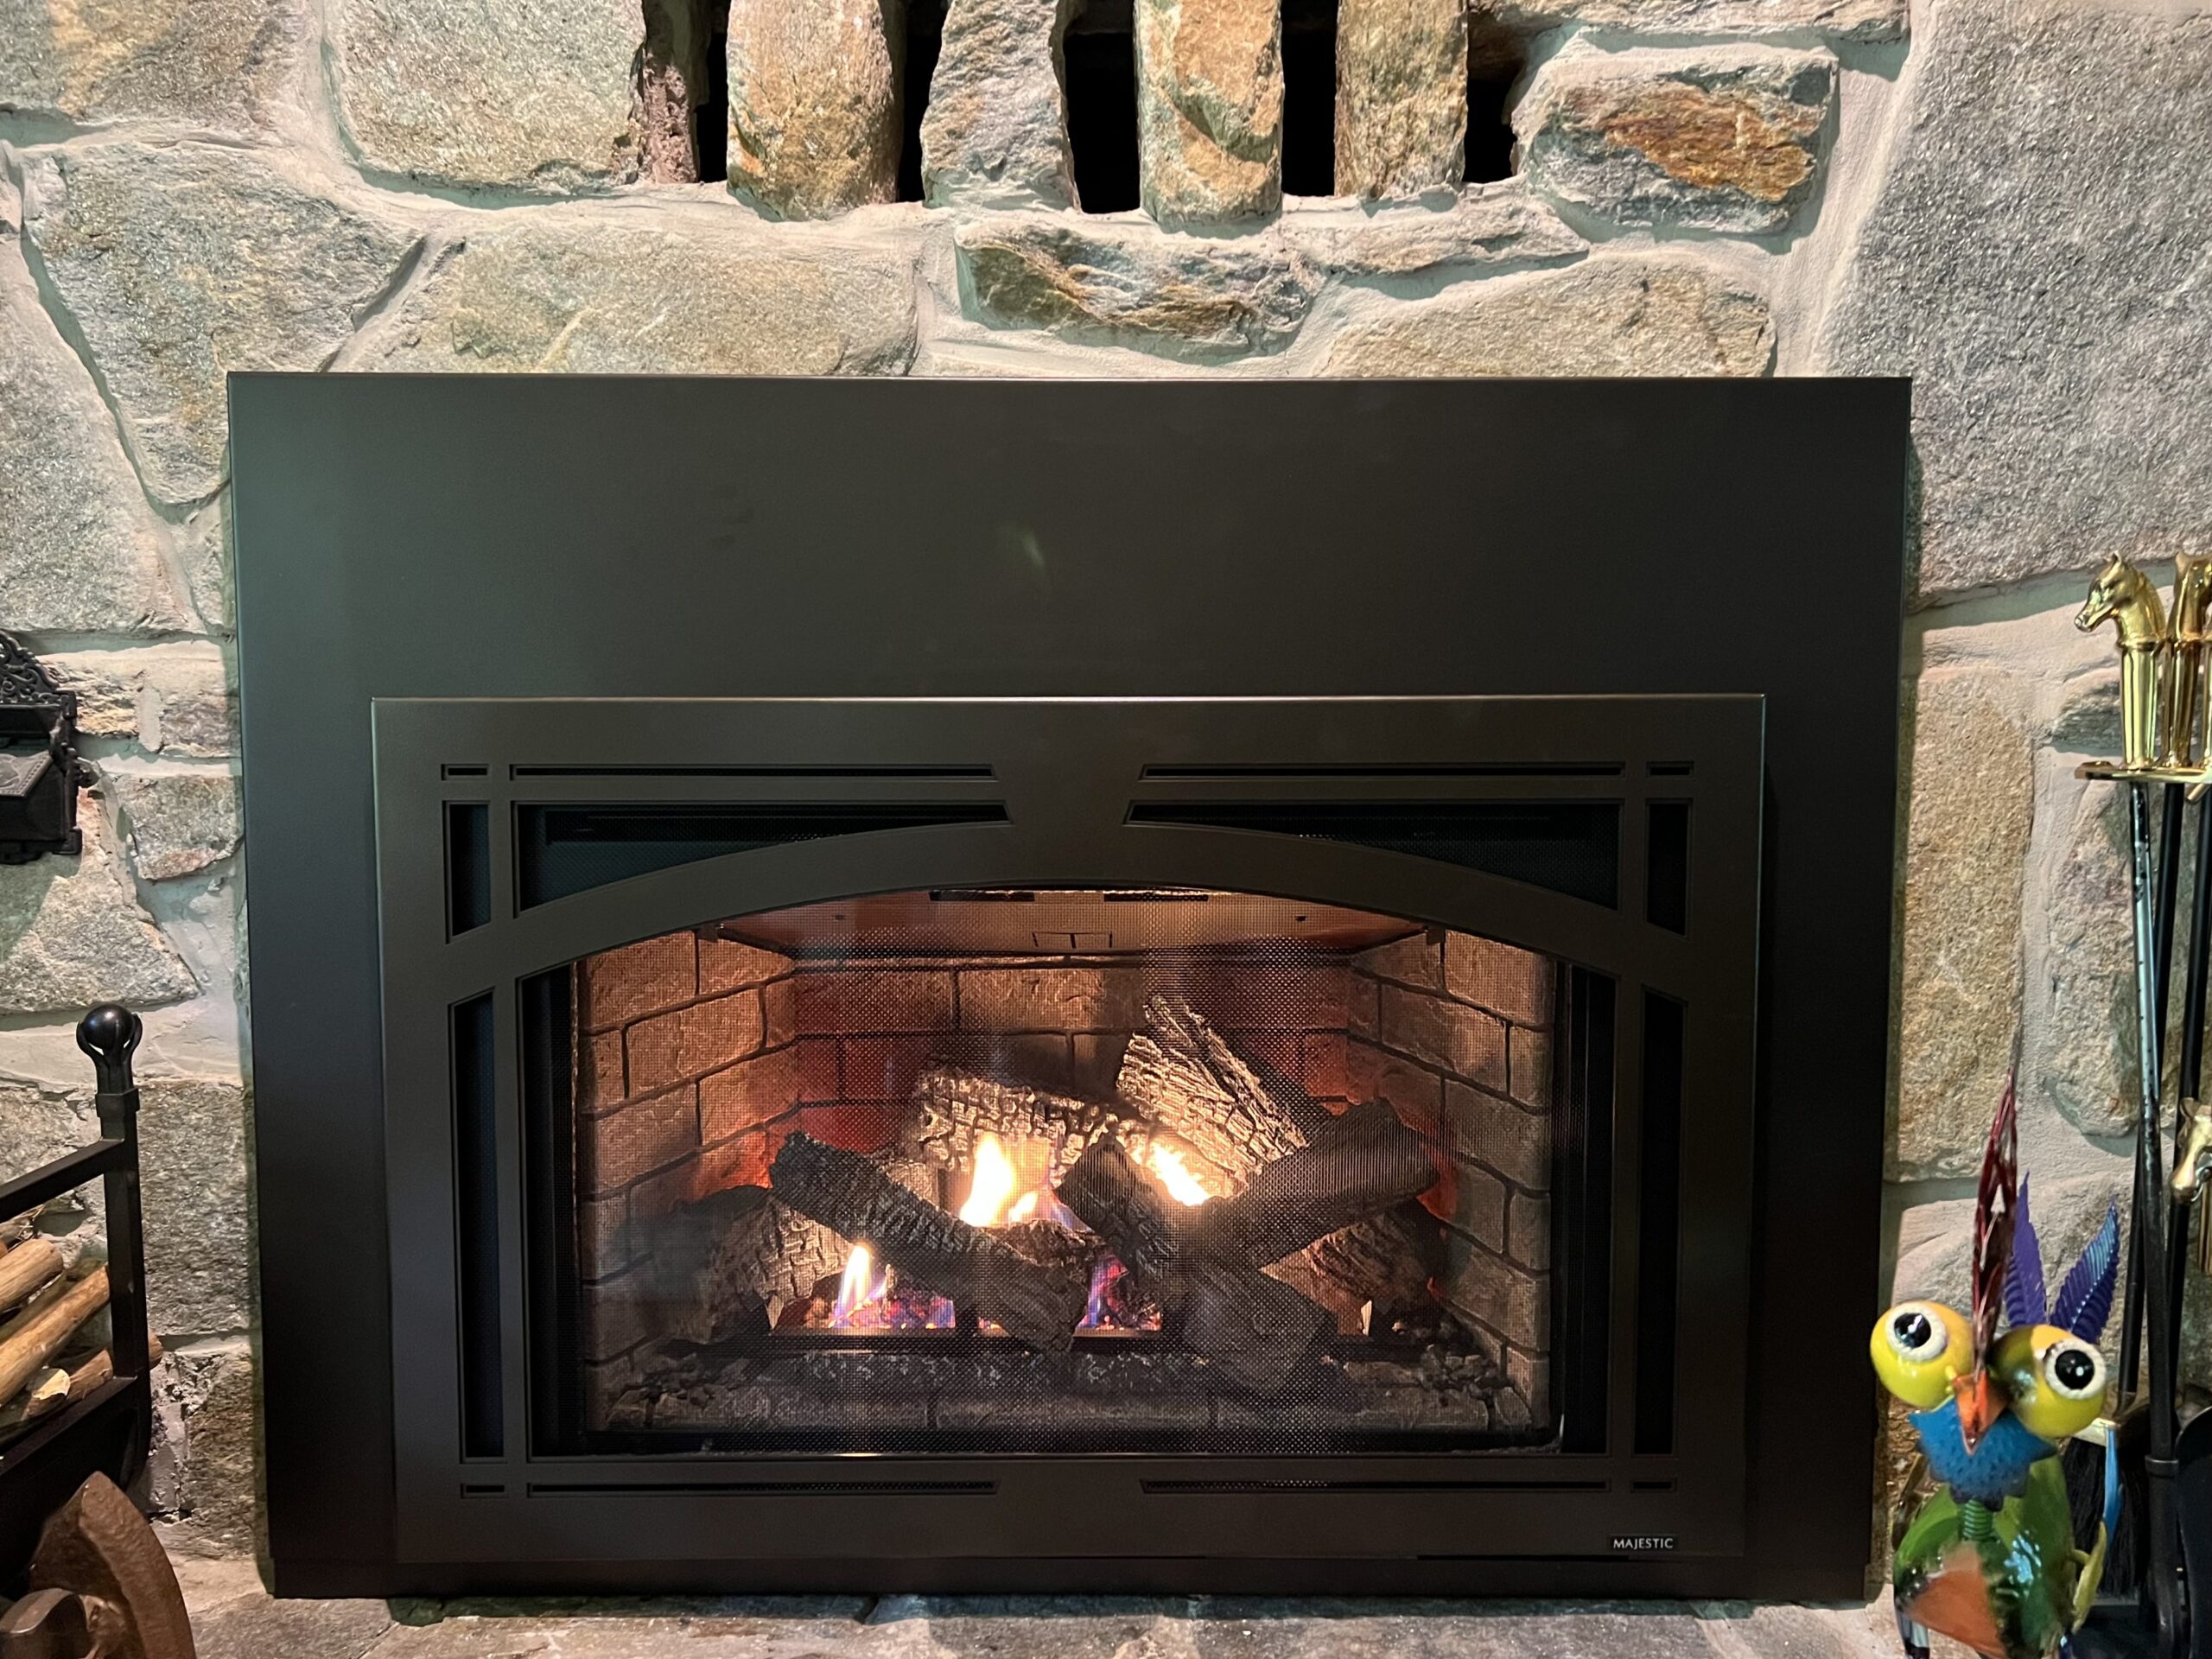 Gas fireplace insert in a wood burning fireplace with grey stone